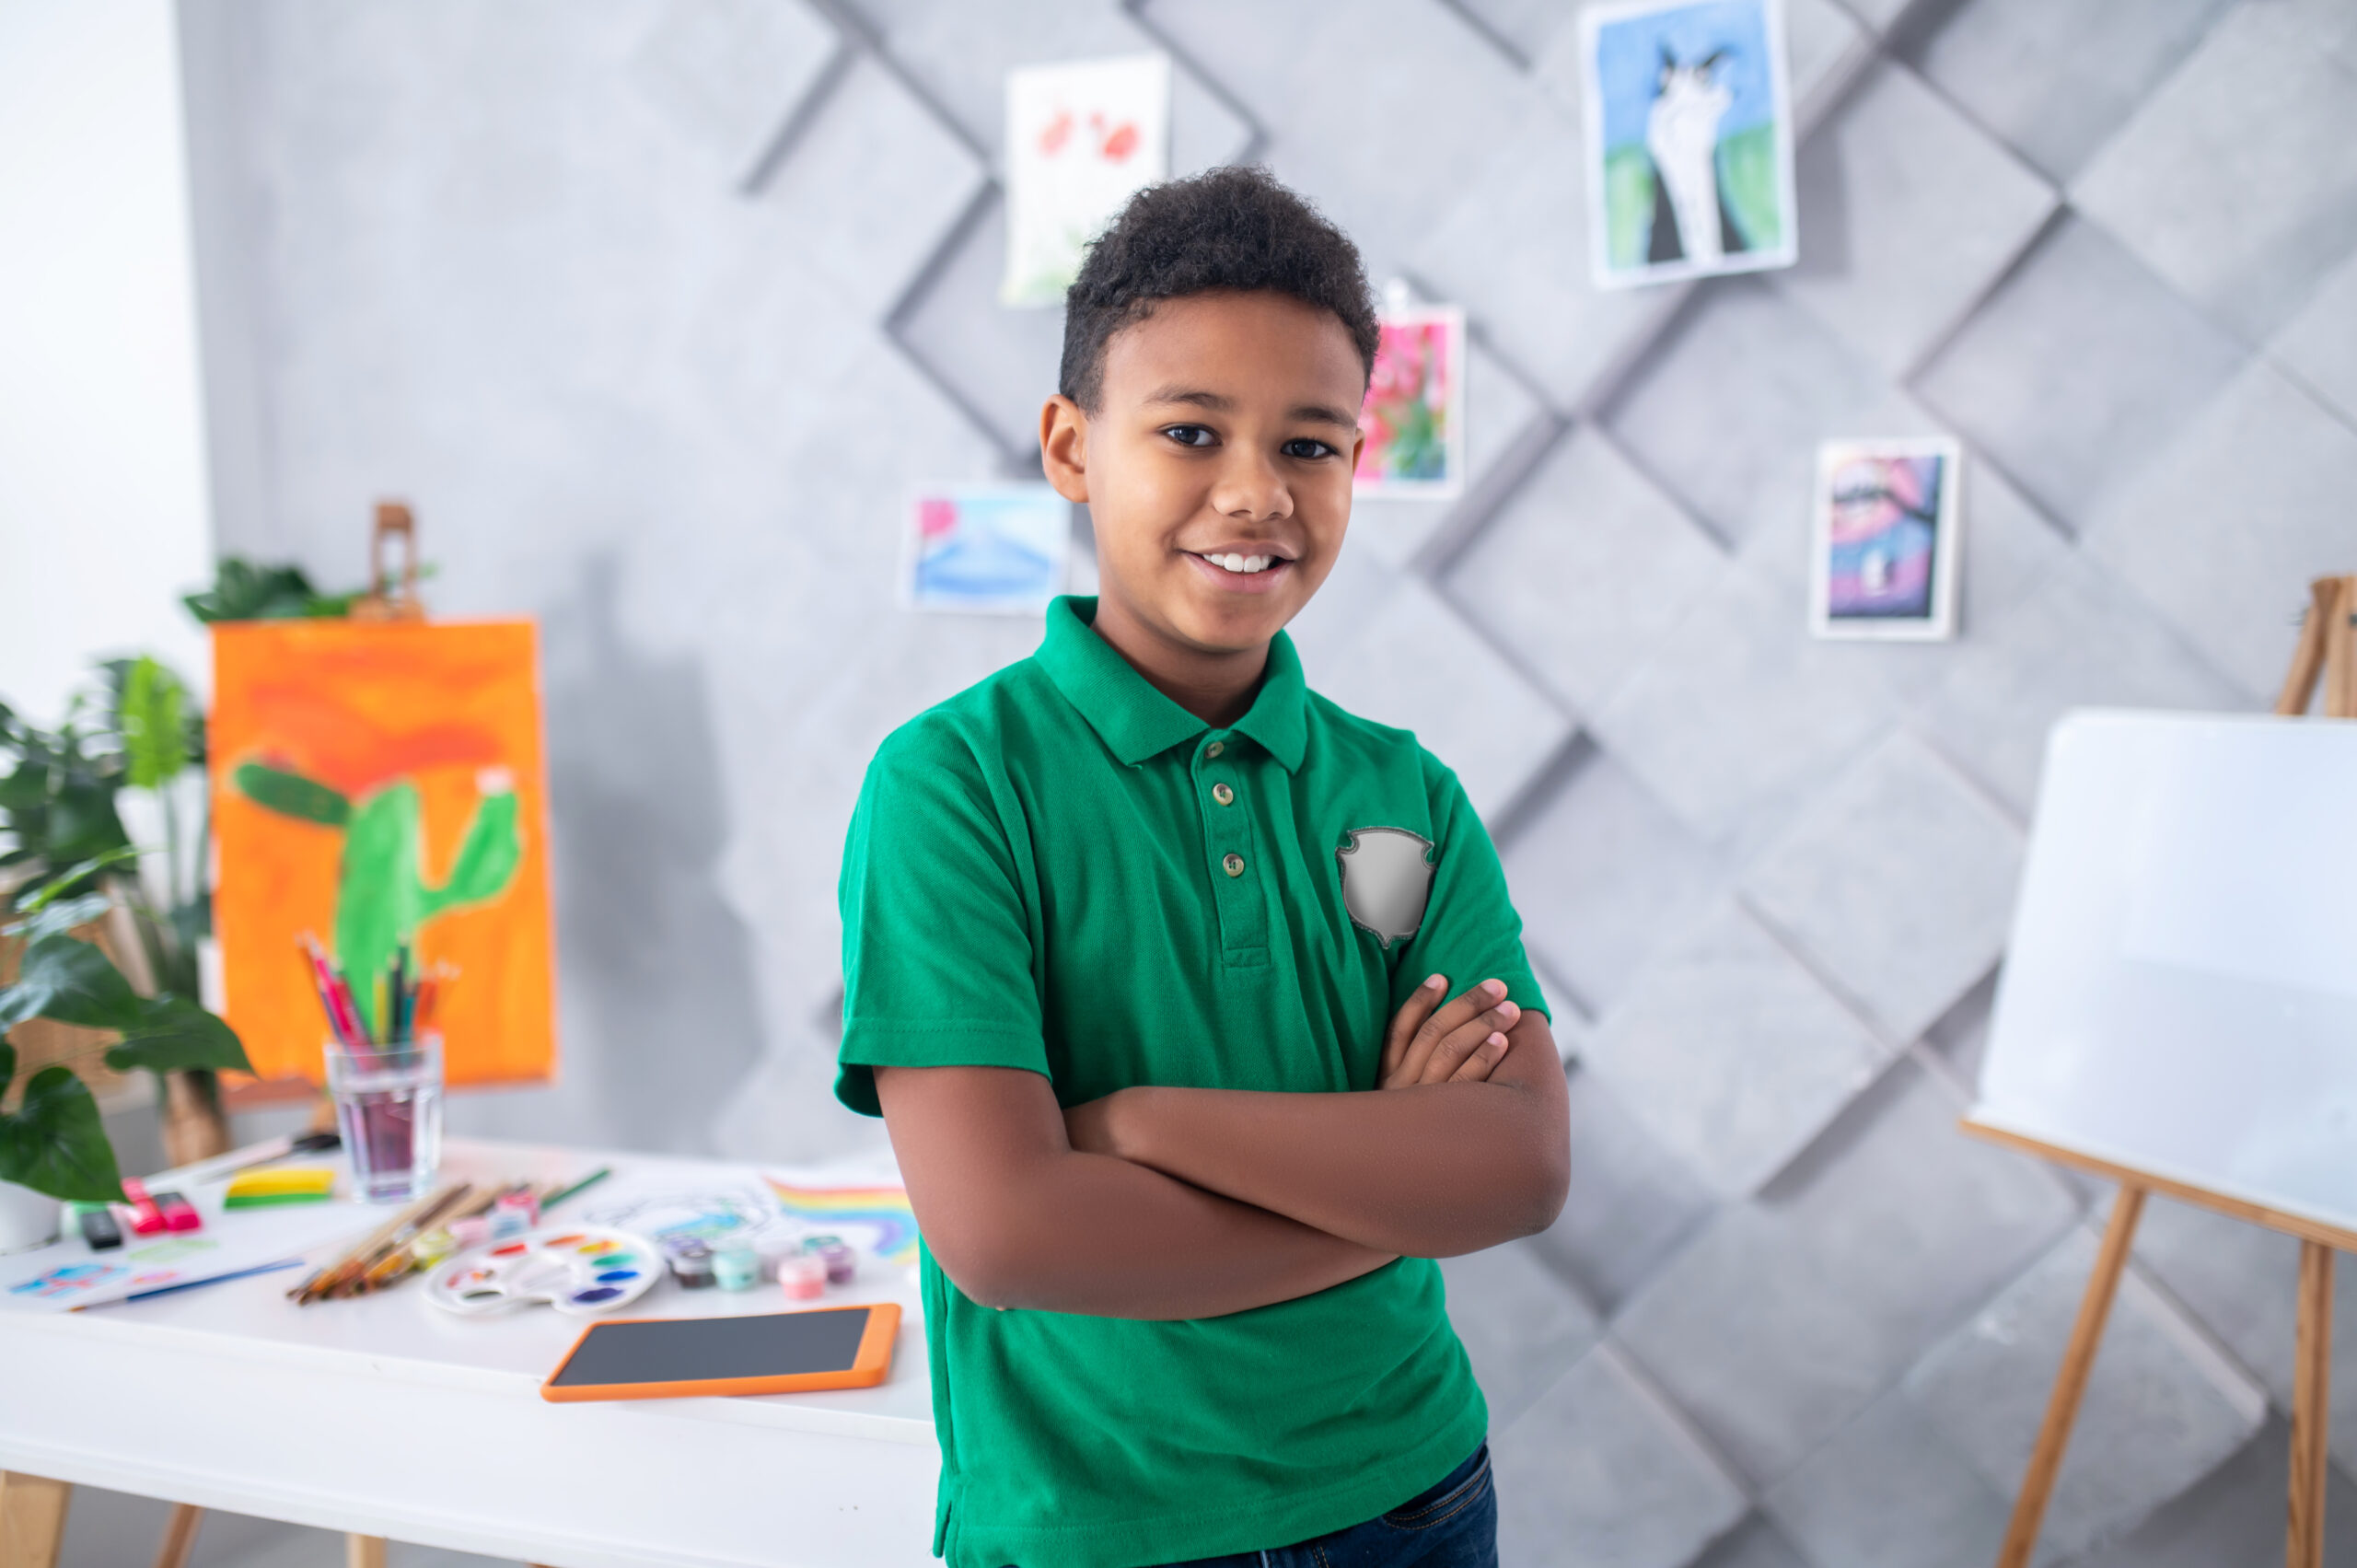 Confidence. Smiling african american boy of primary school age standing with folded arms looking at camera in art supplies room during daytime